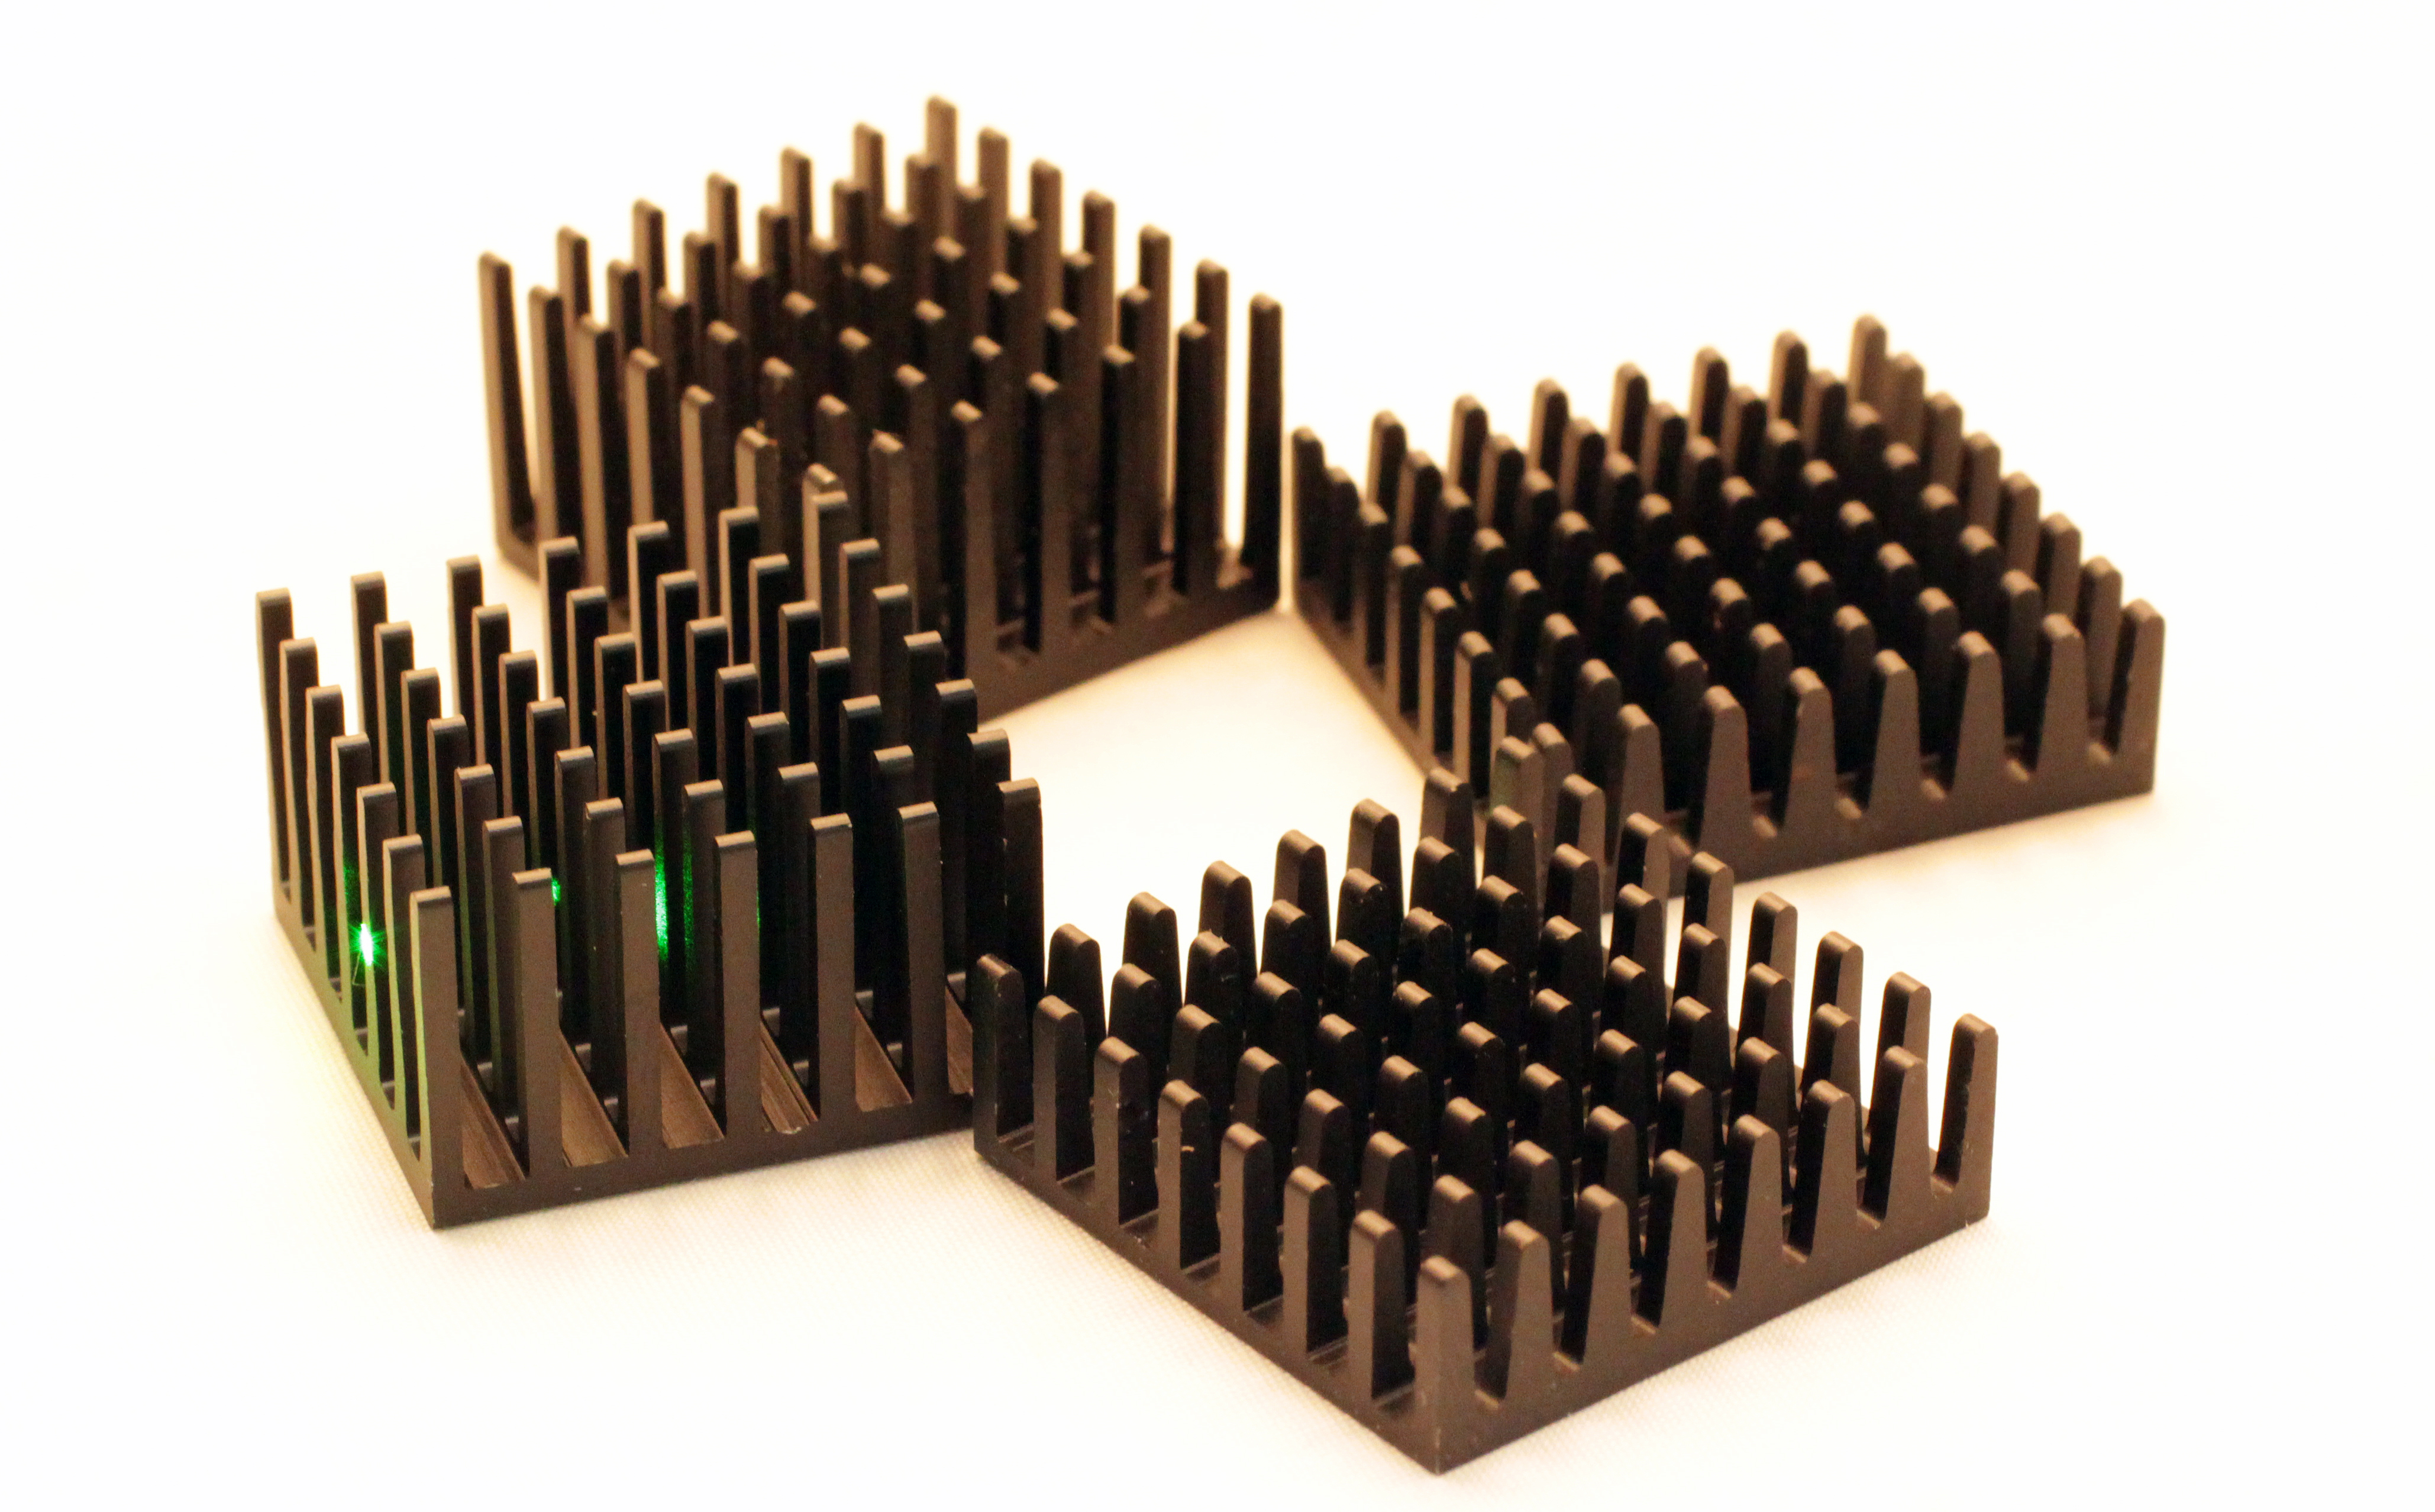 Heat Sinks Provide Cost-Effective Solutions at High Airflow